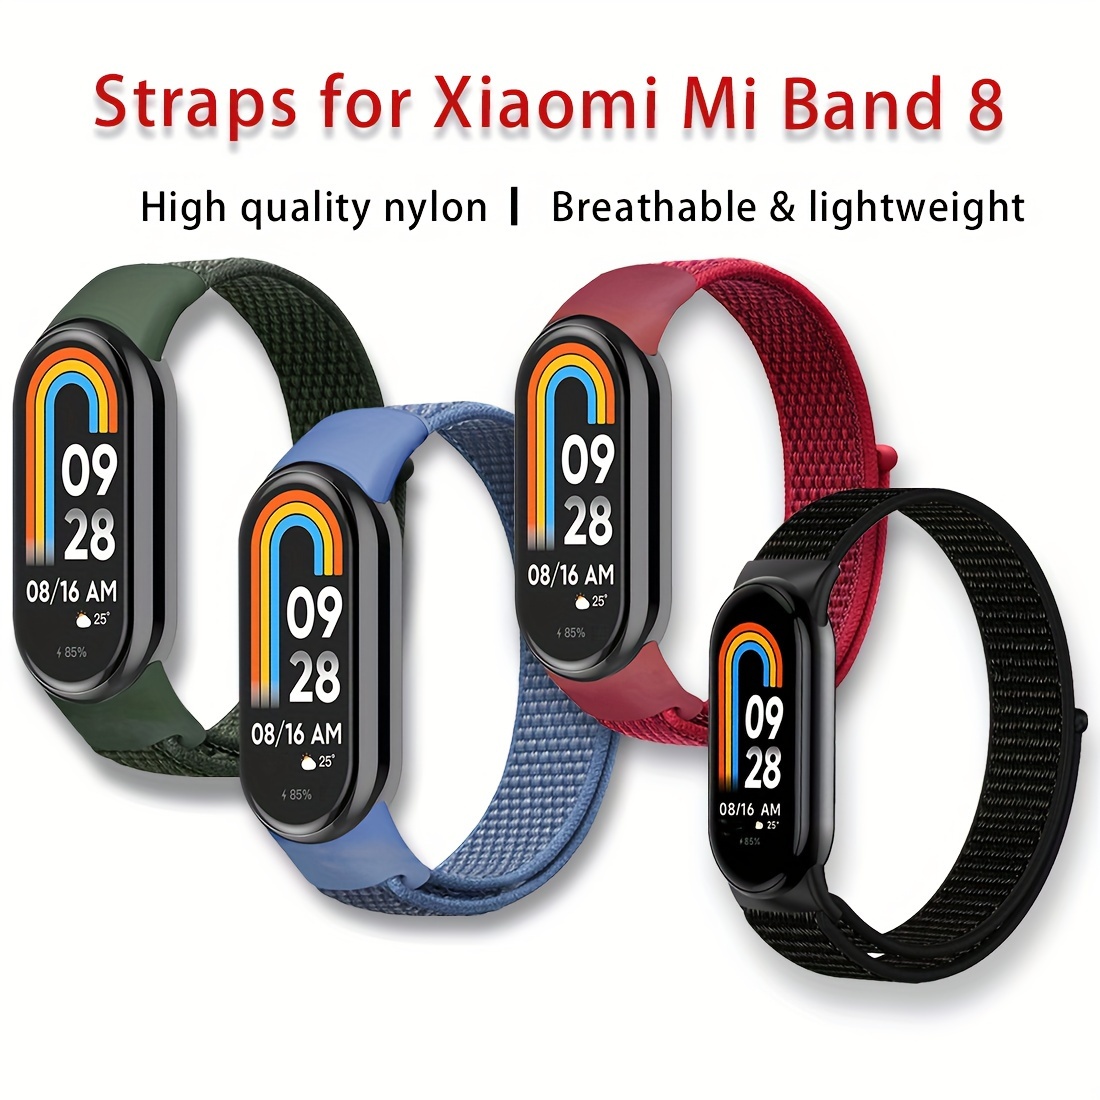 

Strap Band For Xiaomi Mi Band 8 Strap Replacement Band, Nylon Skin-friendly Wrist Strap Adjustable Sports Wristbands For Women Men Xiao Mi Band 8 Bracelets (without Watch )